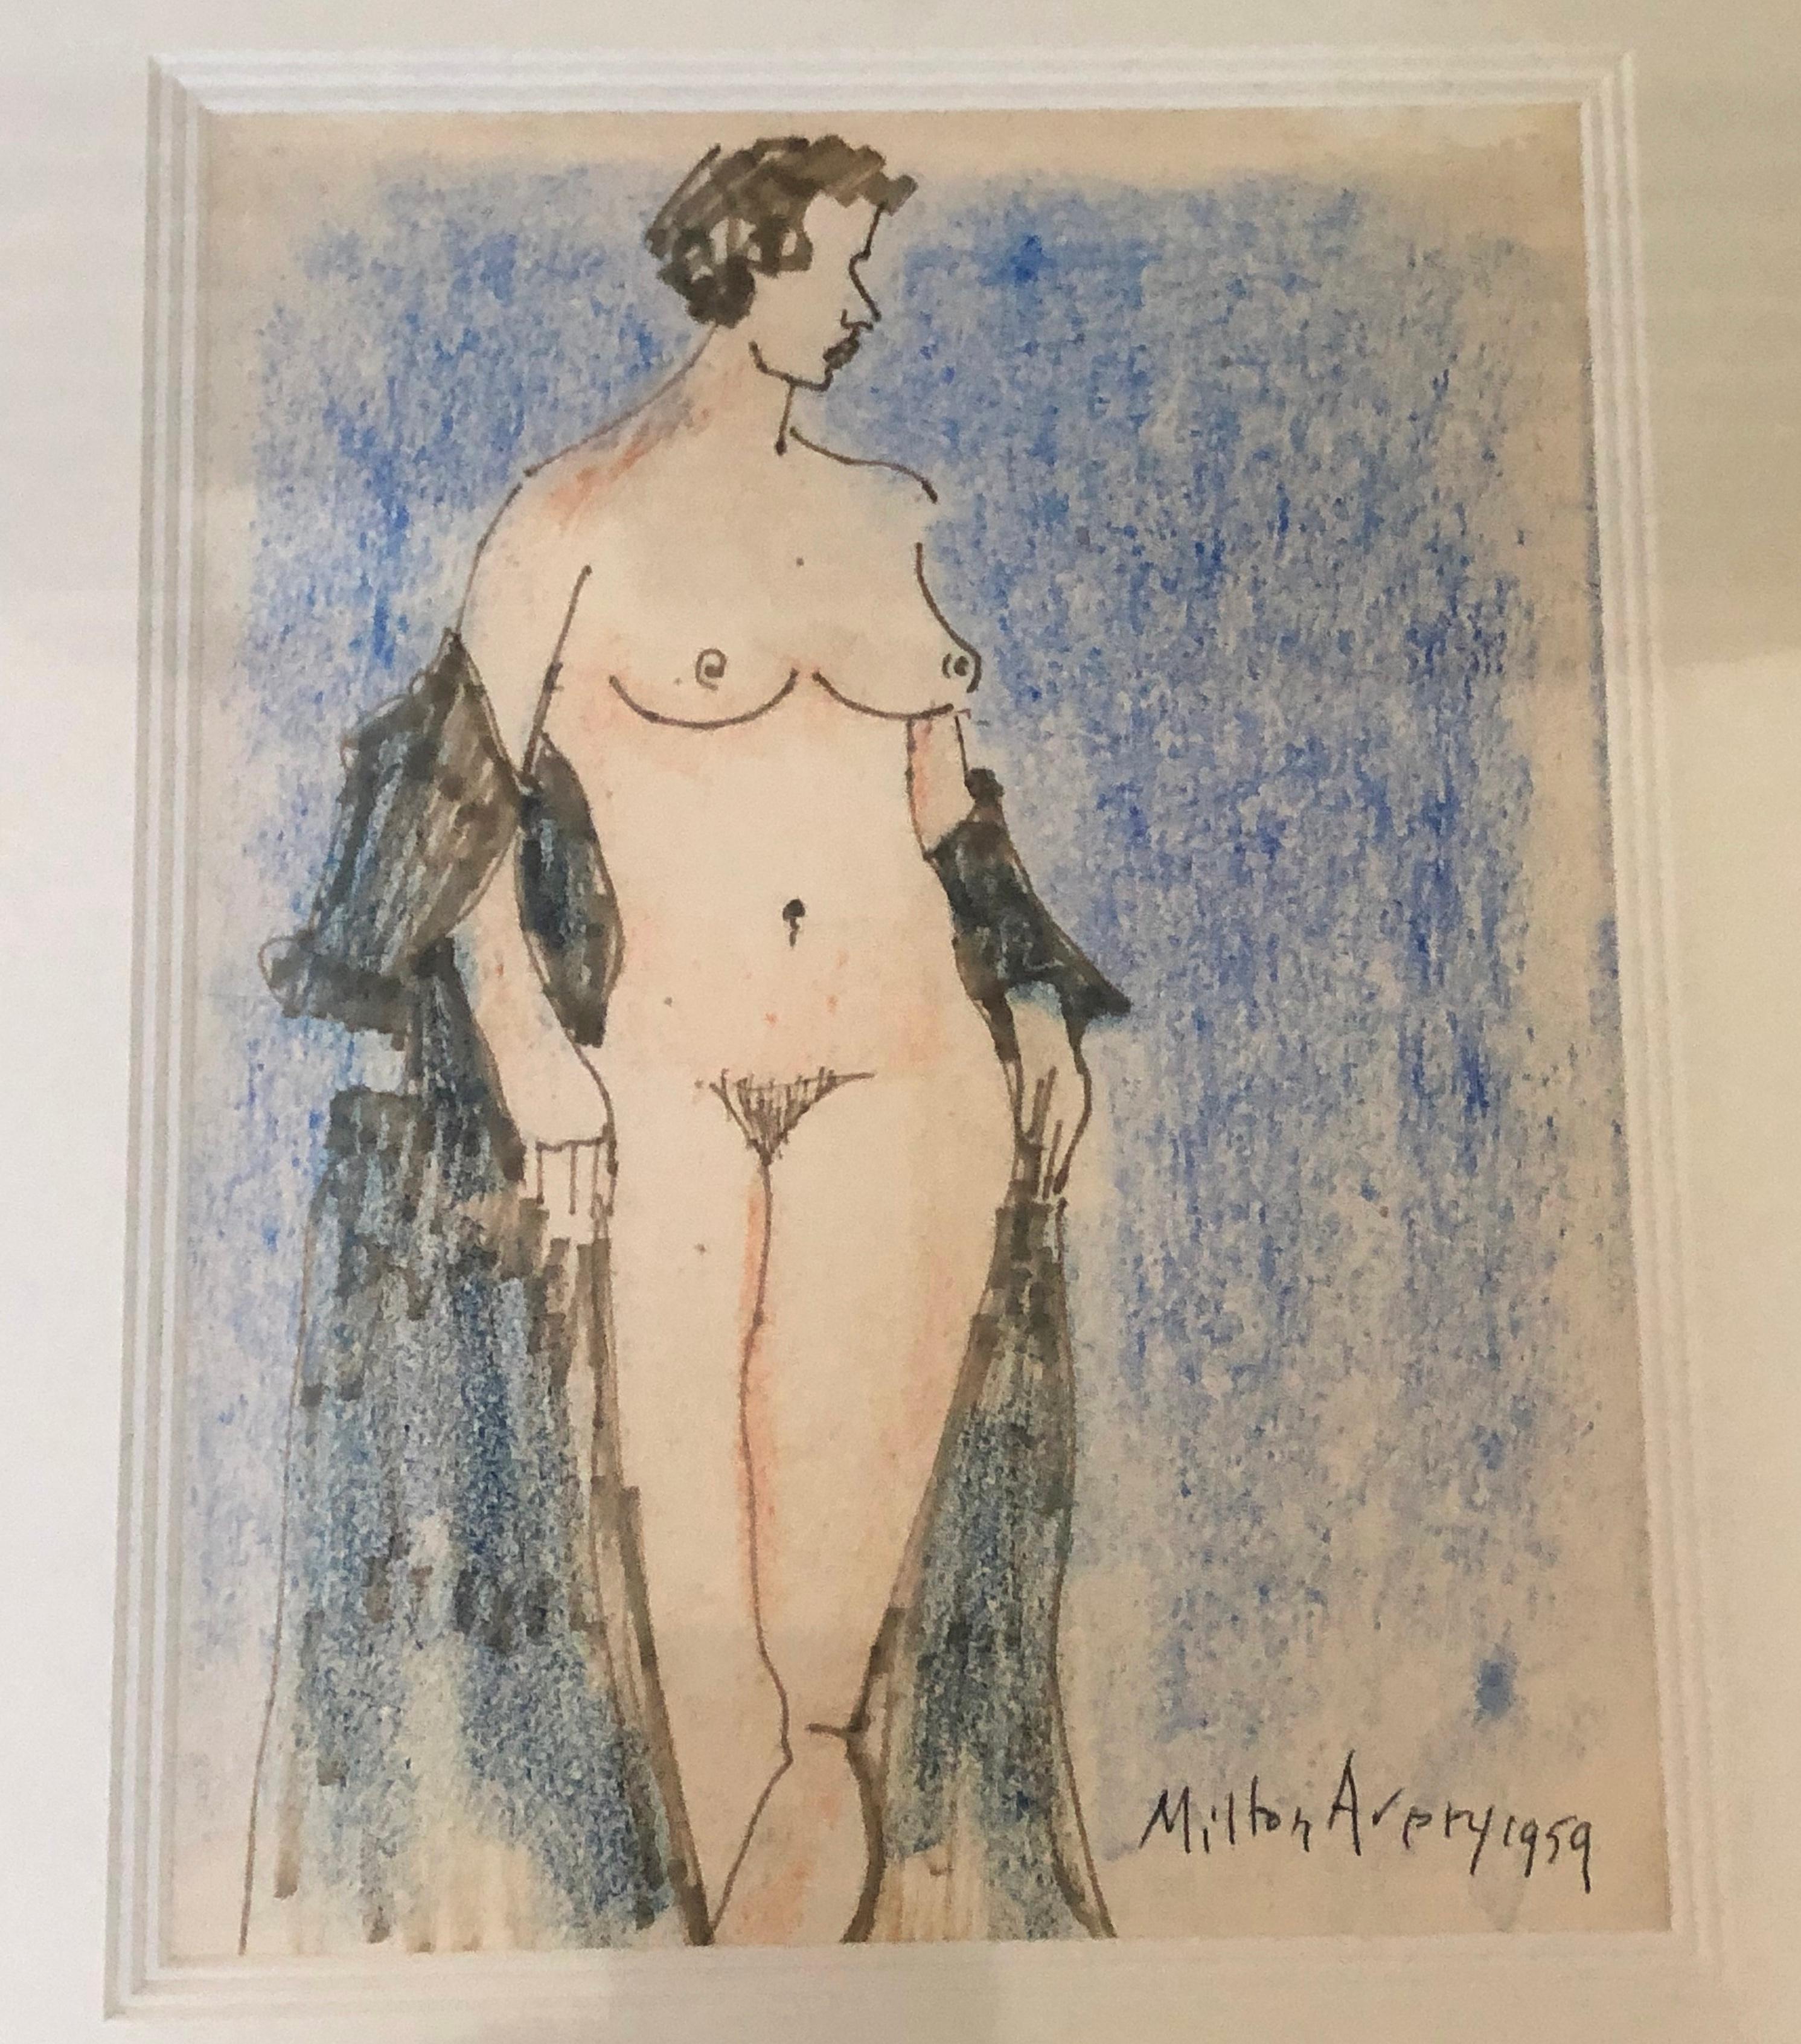 A Milton Avery drawing in pastel and ink of a nude woman with a black robe. Signed and dated Milton Avery 1959 lower right. 

Provenance: 
Private Collection, Manchester-by-the-Sea, Massachusetts
Sotheby's, New York

Archivally framed. 

Framed